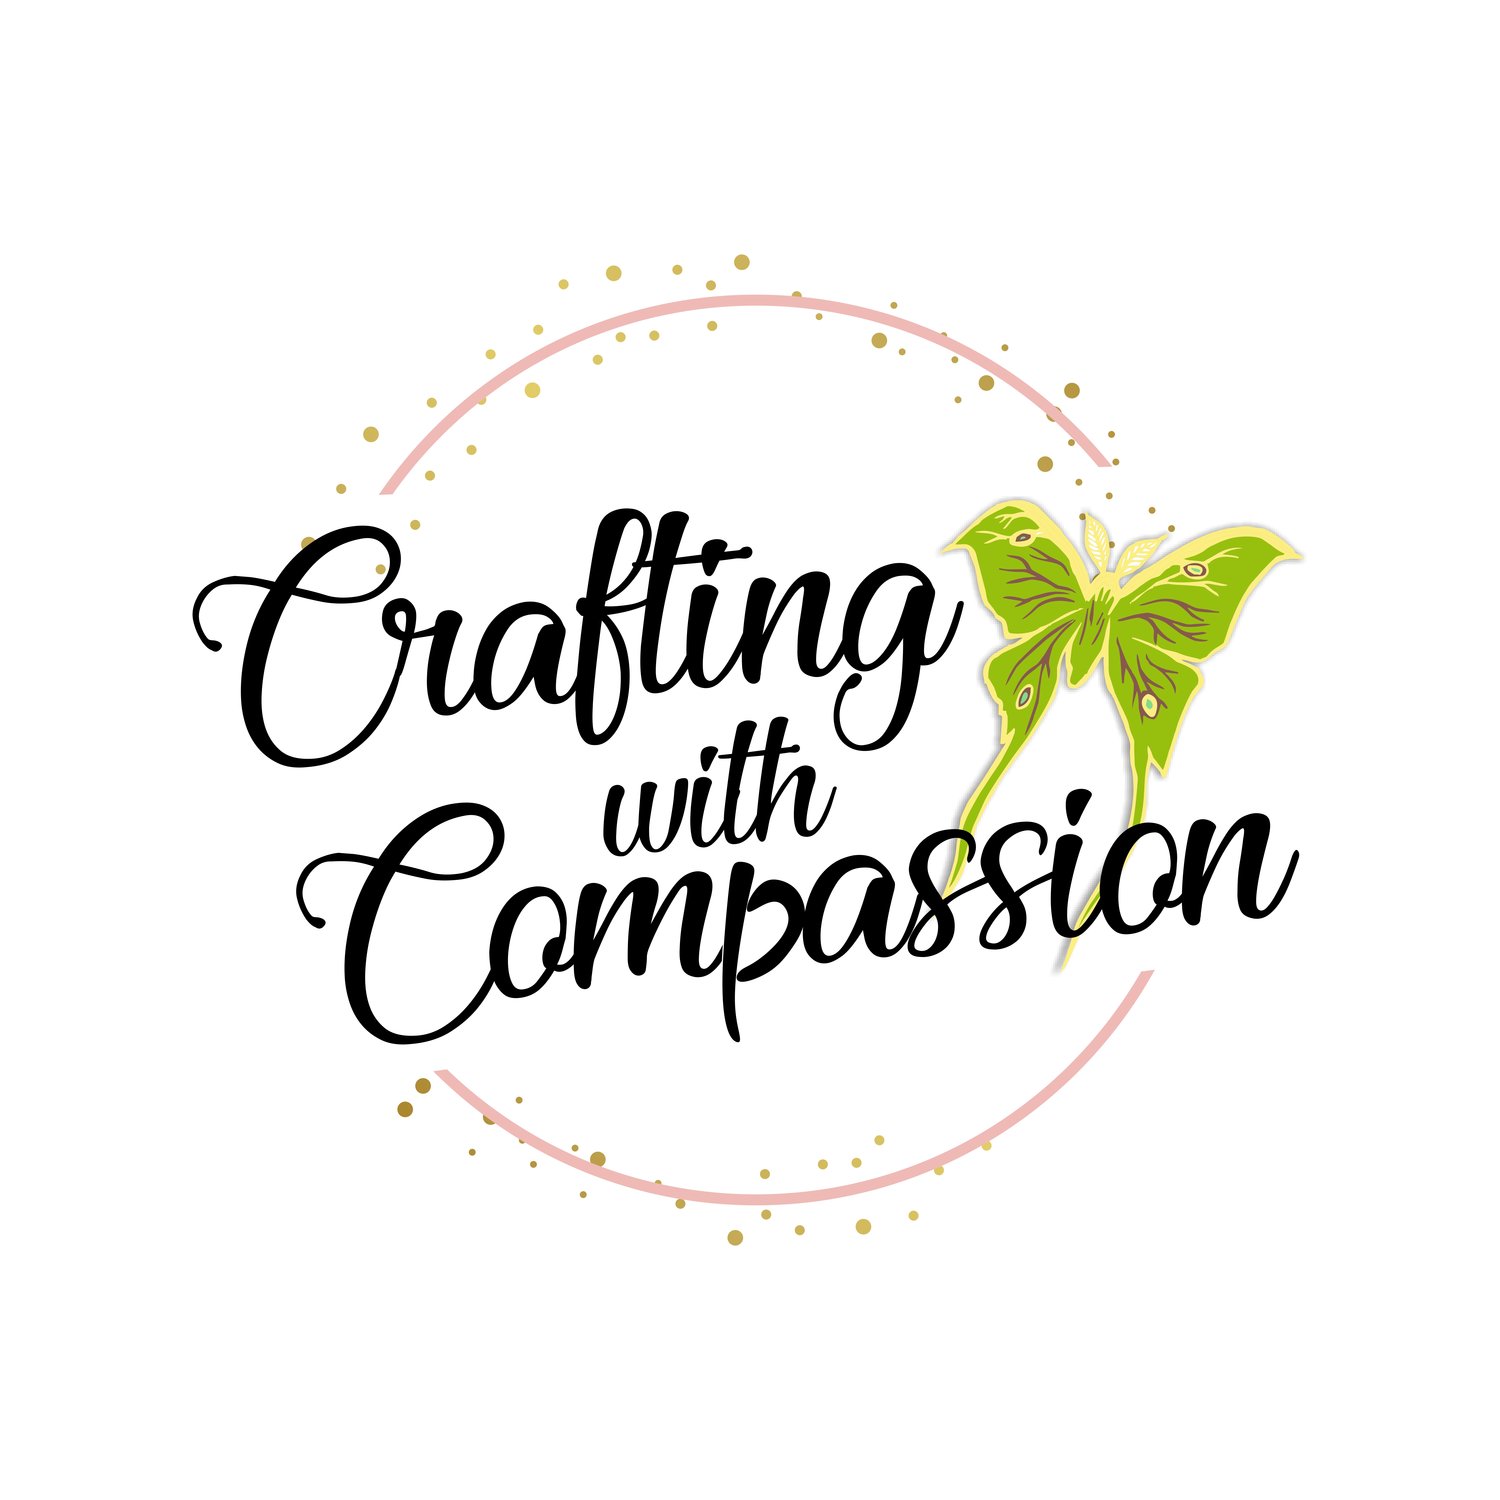 Crafting with Compassion